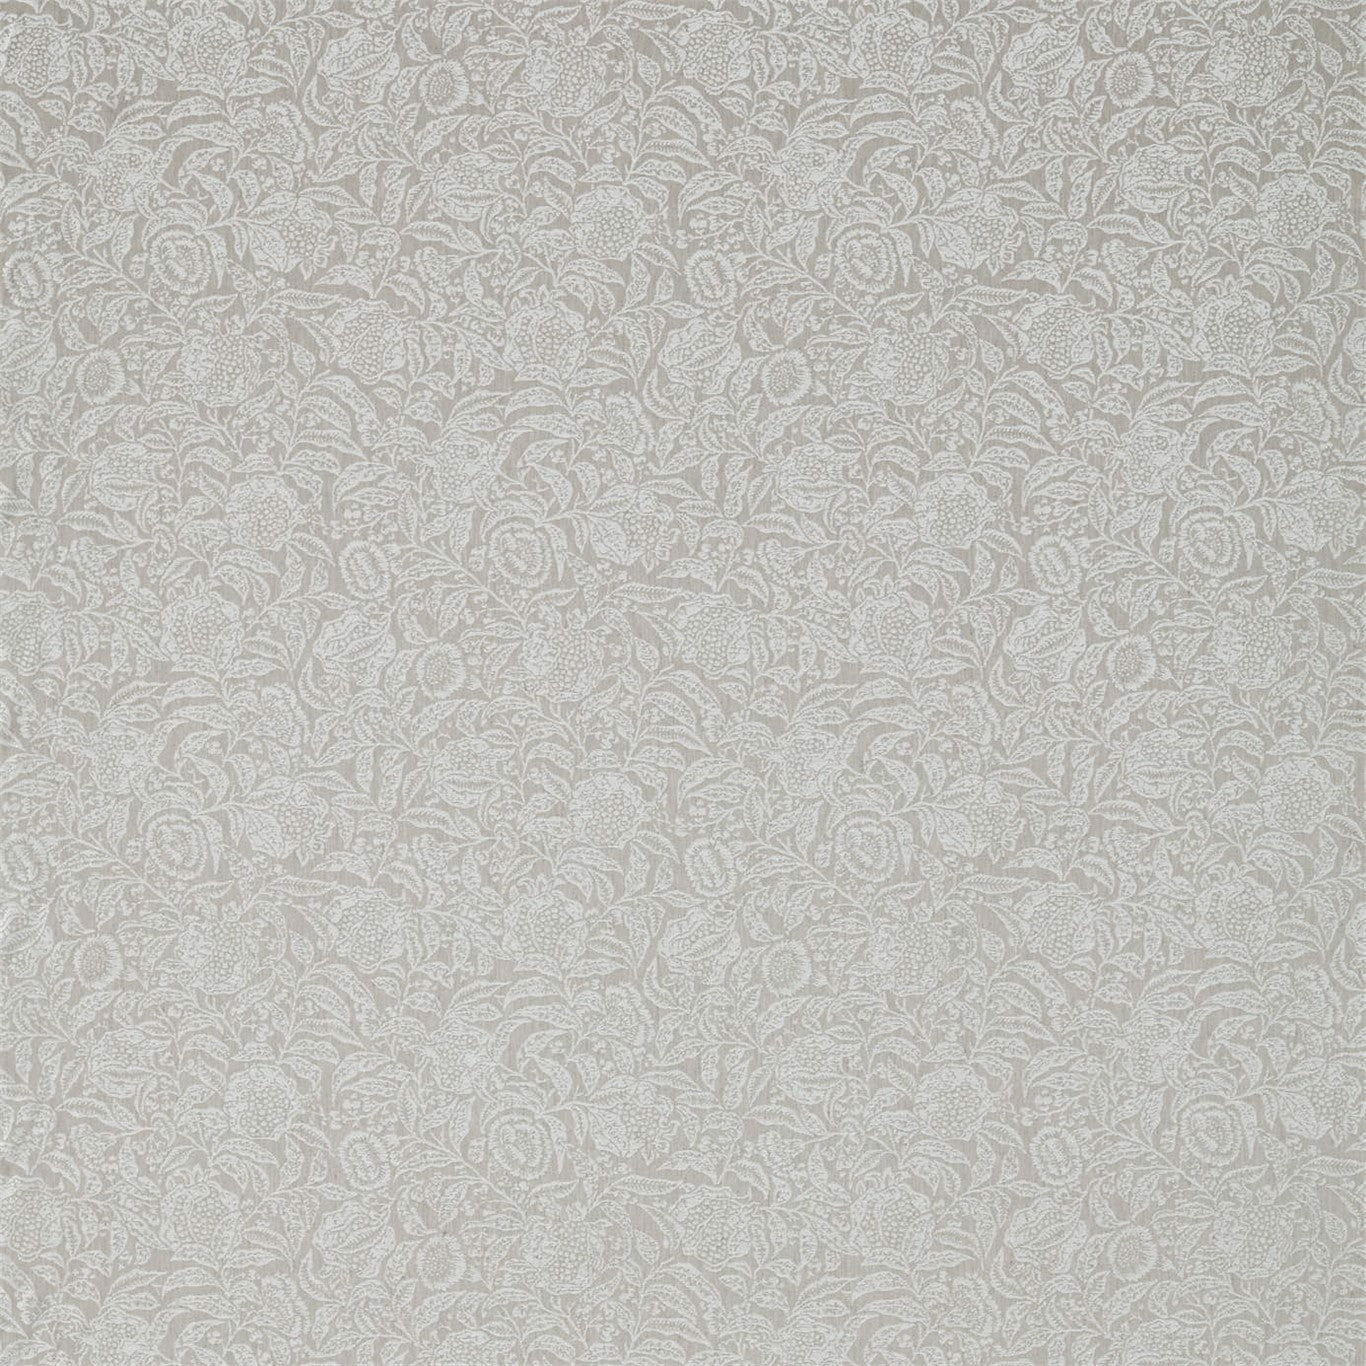 Annandale Weave Fabric by Sanderson - DDAM236467 - Dove